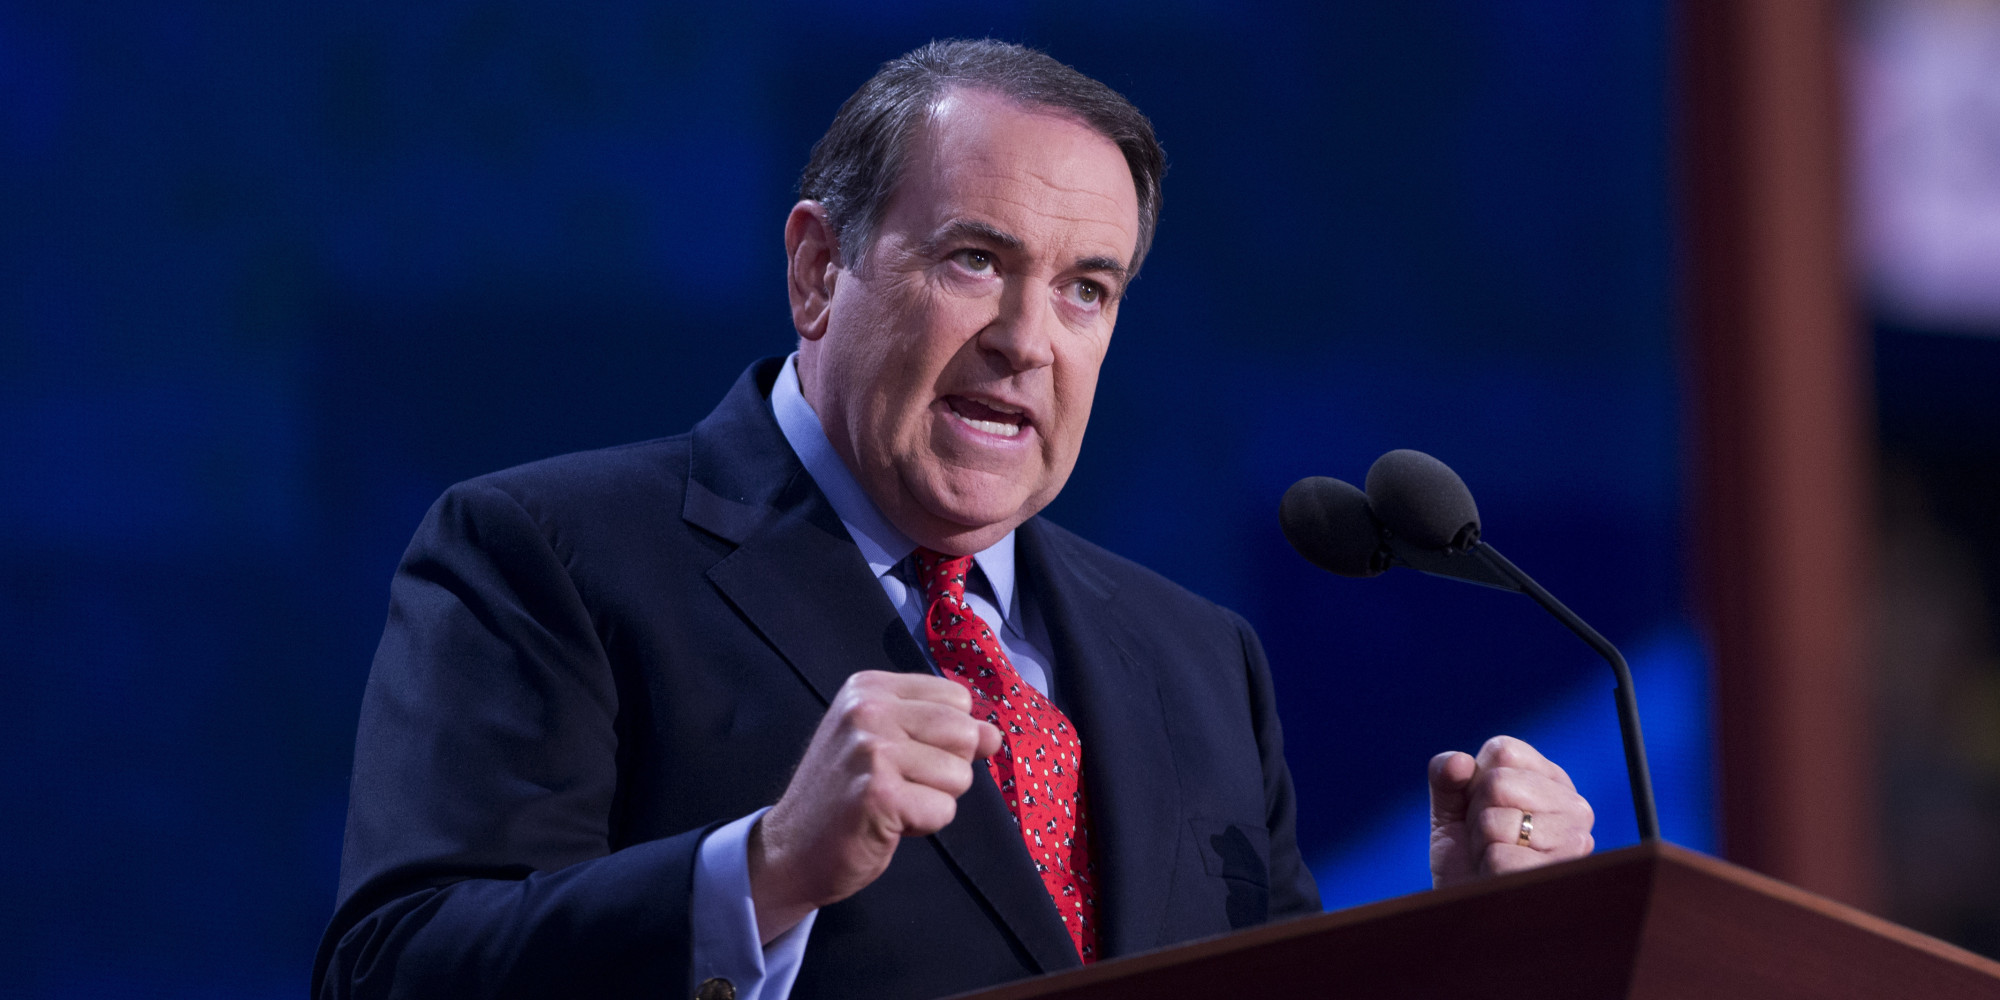 Presidential candidate Mike Huckabee: "If anybody wants to believe that they are the descendants of a primate, they are certainly welcome to do it. I don't know how far they will march that back. But I believe that all of us in this room are the unique creations of a god who knows us and loves us and who created us for his own purpose."